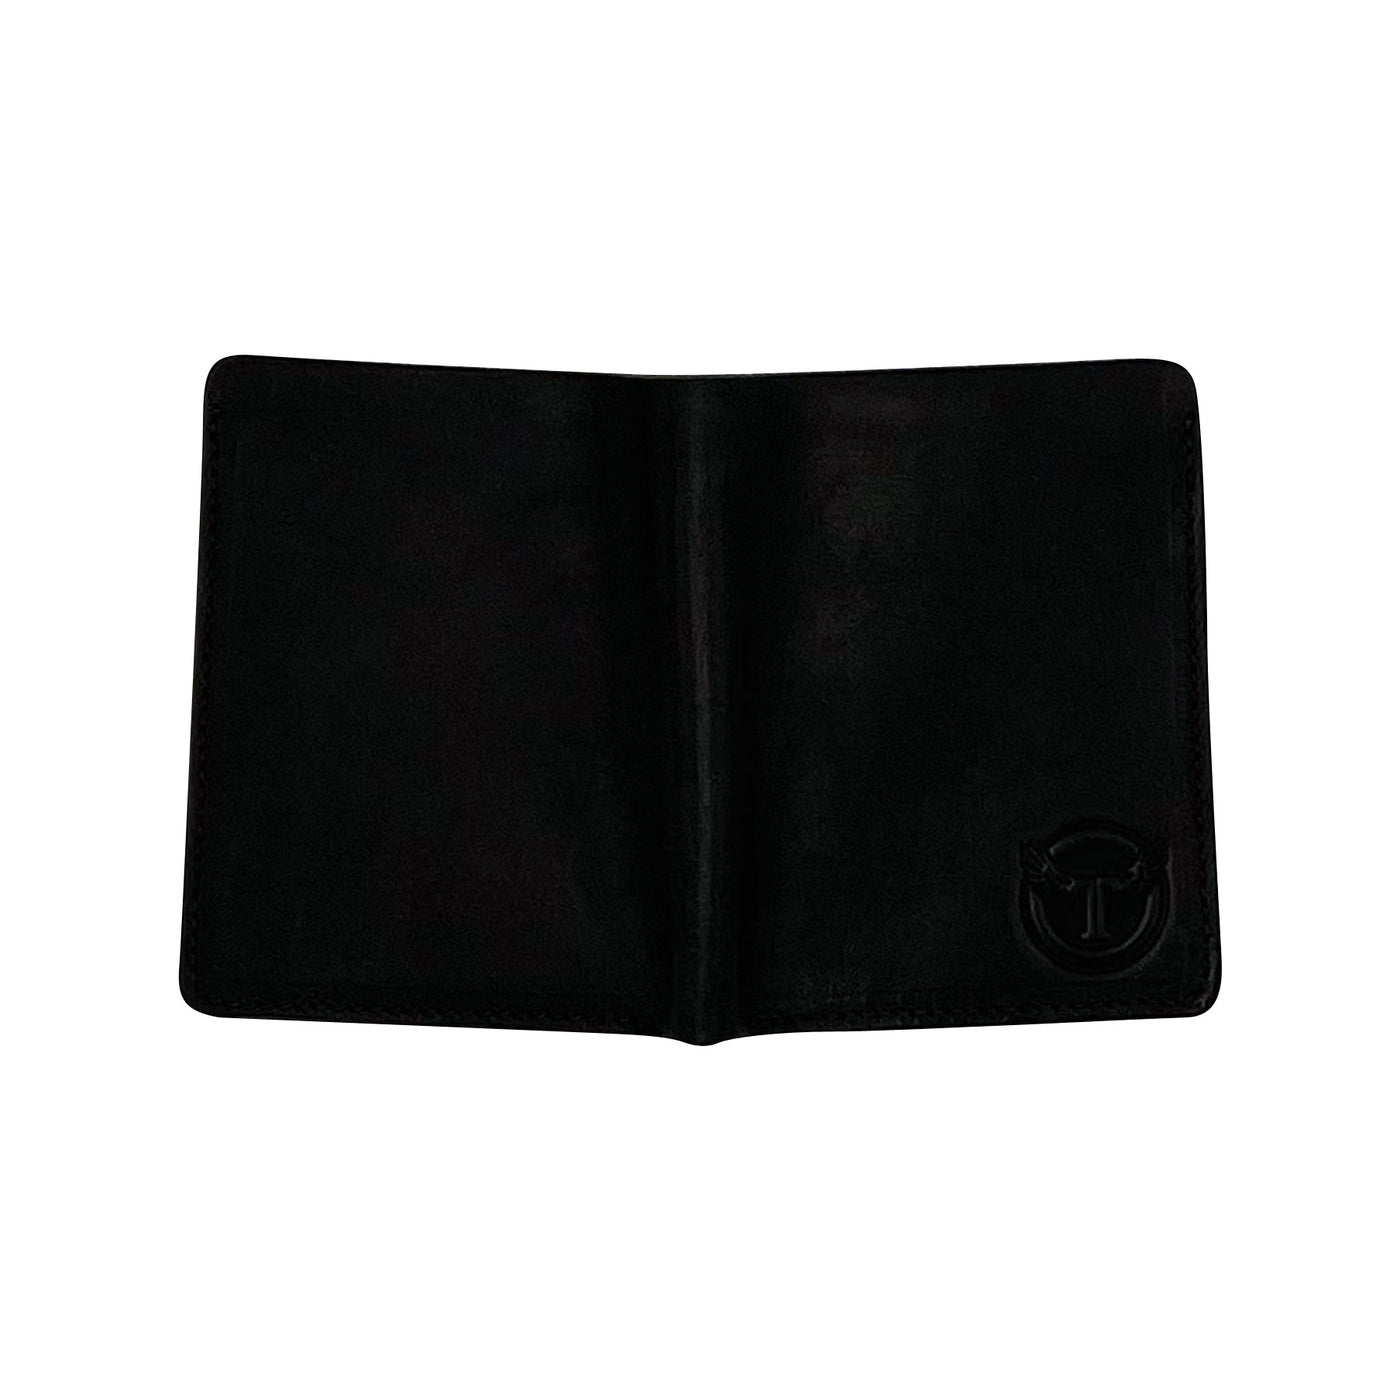 Thedi Leathers Wallet Card Holder Black